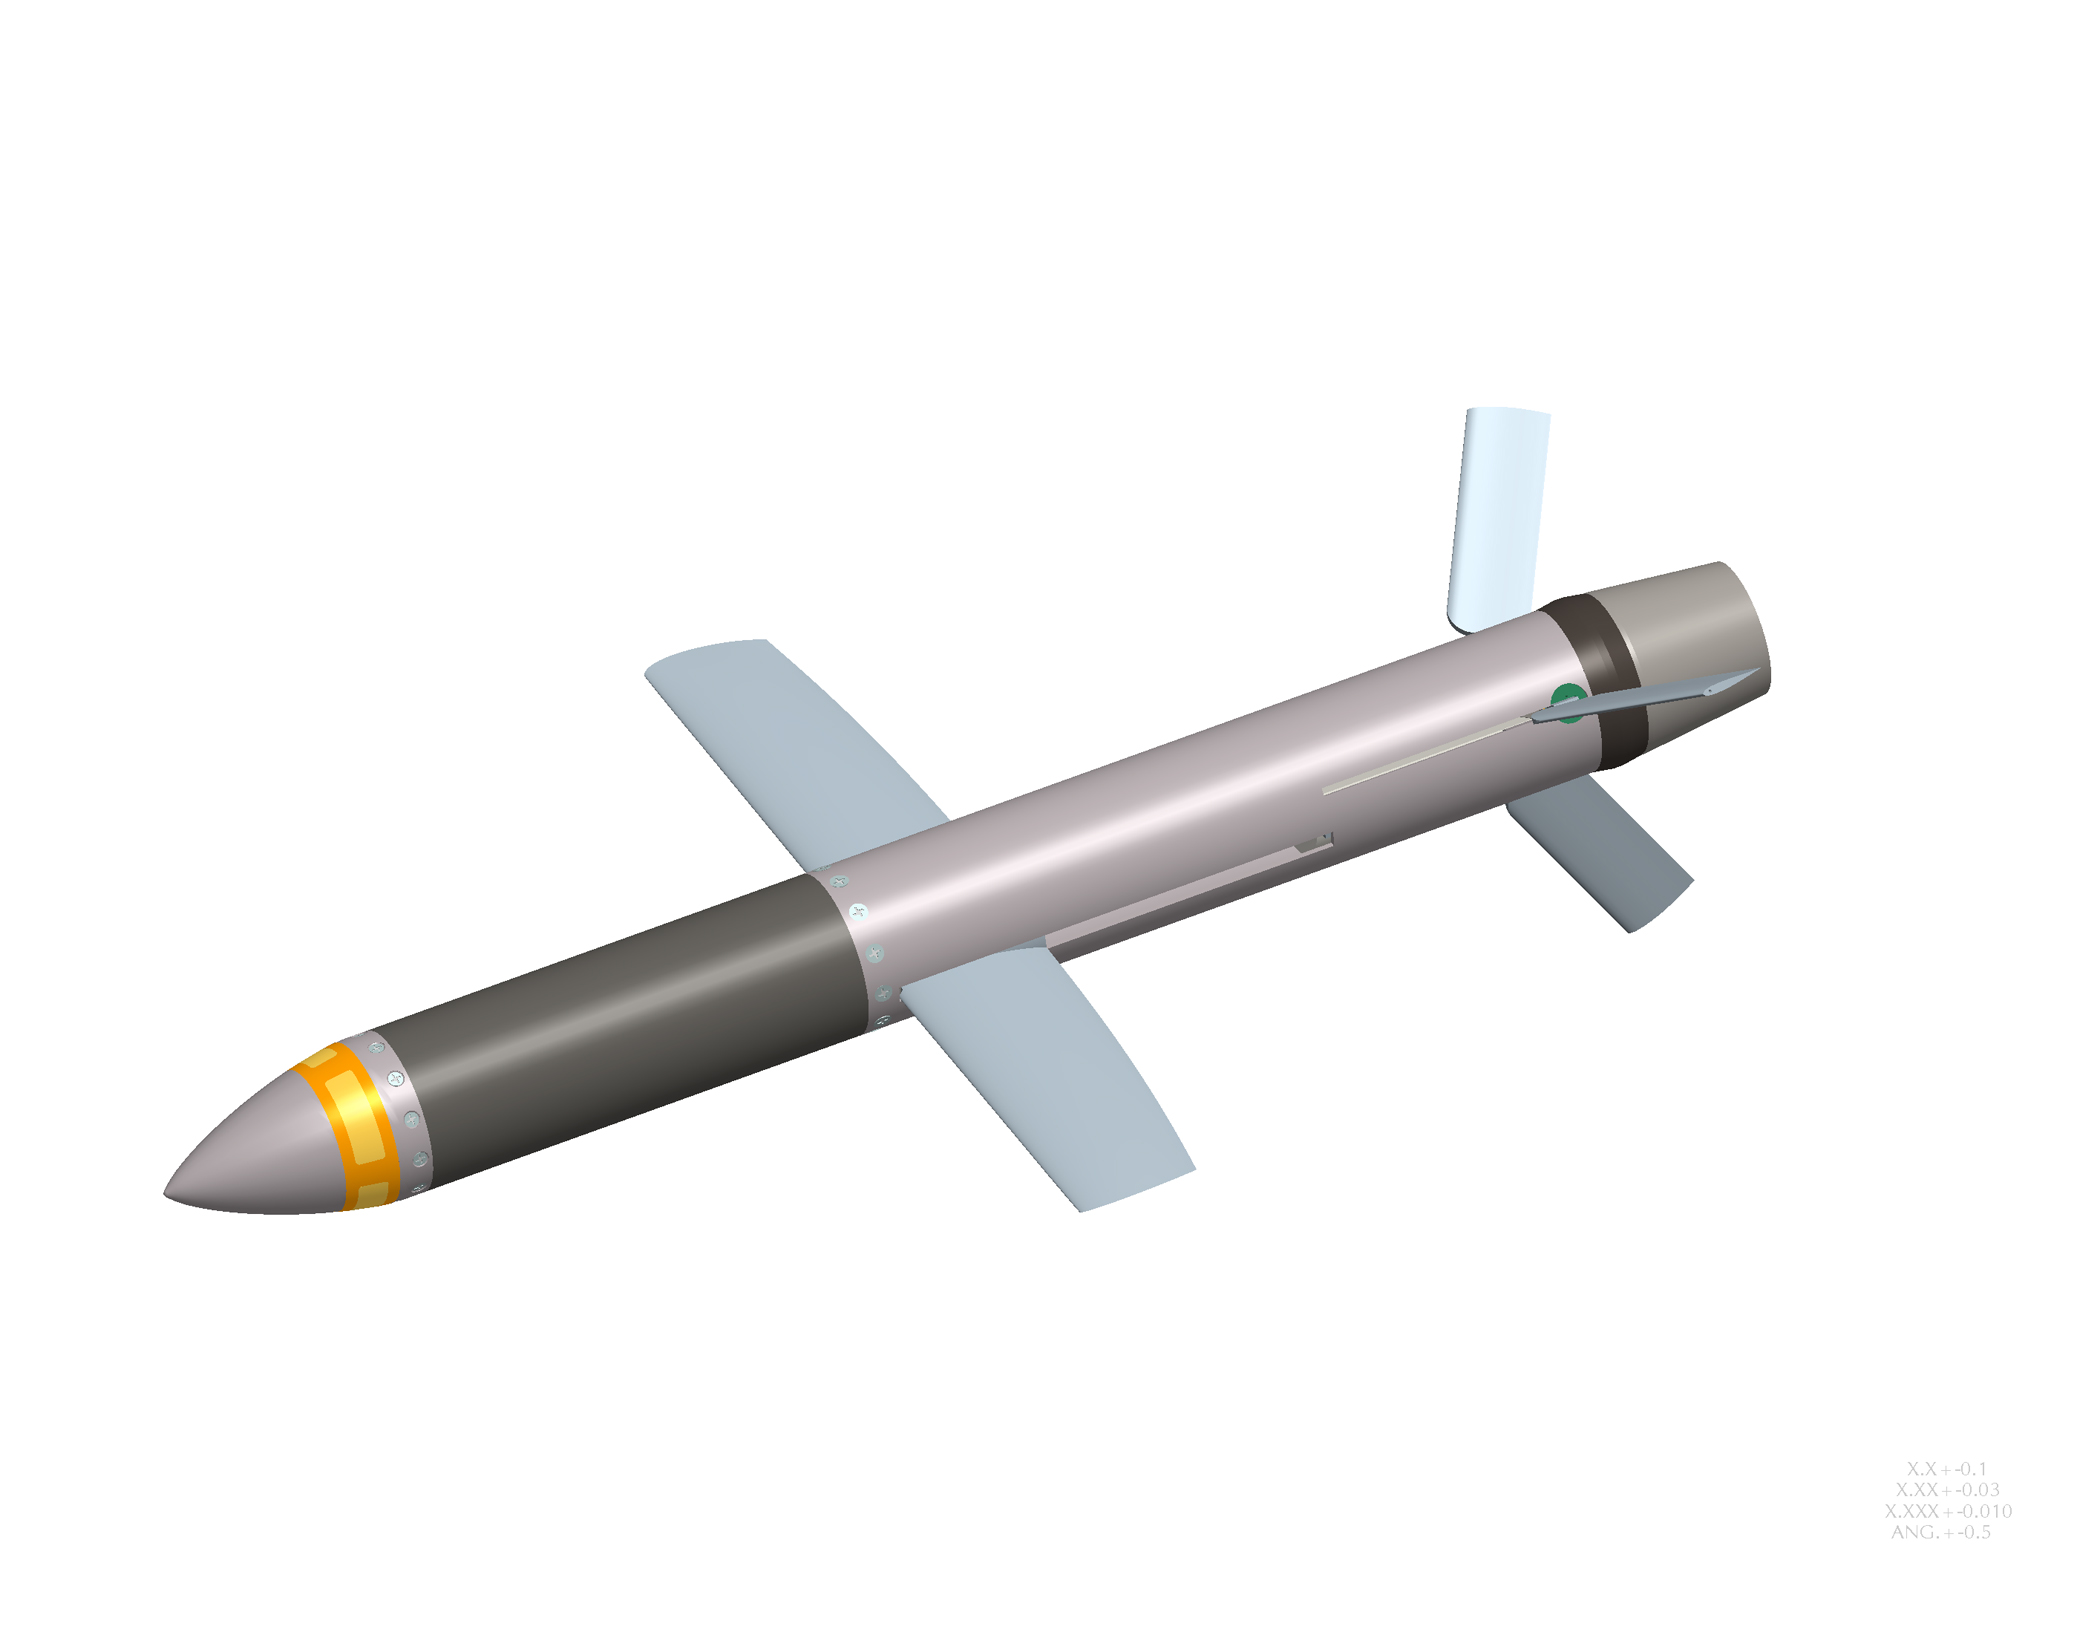 mfc-navy-5-inch-guided-projectile-photo-01-main-h-1.jpg